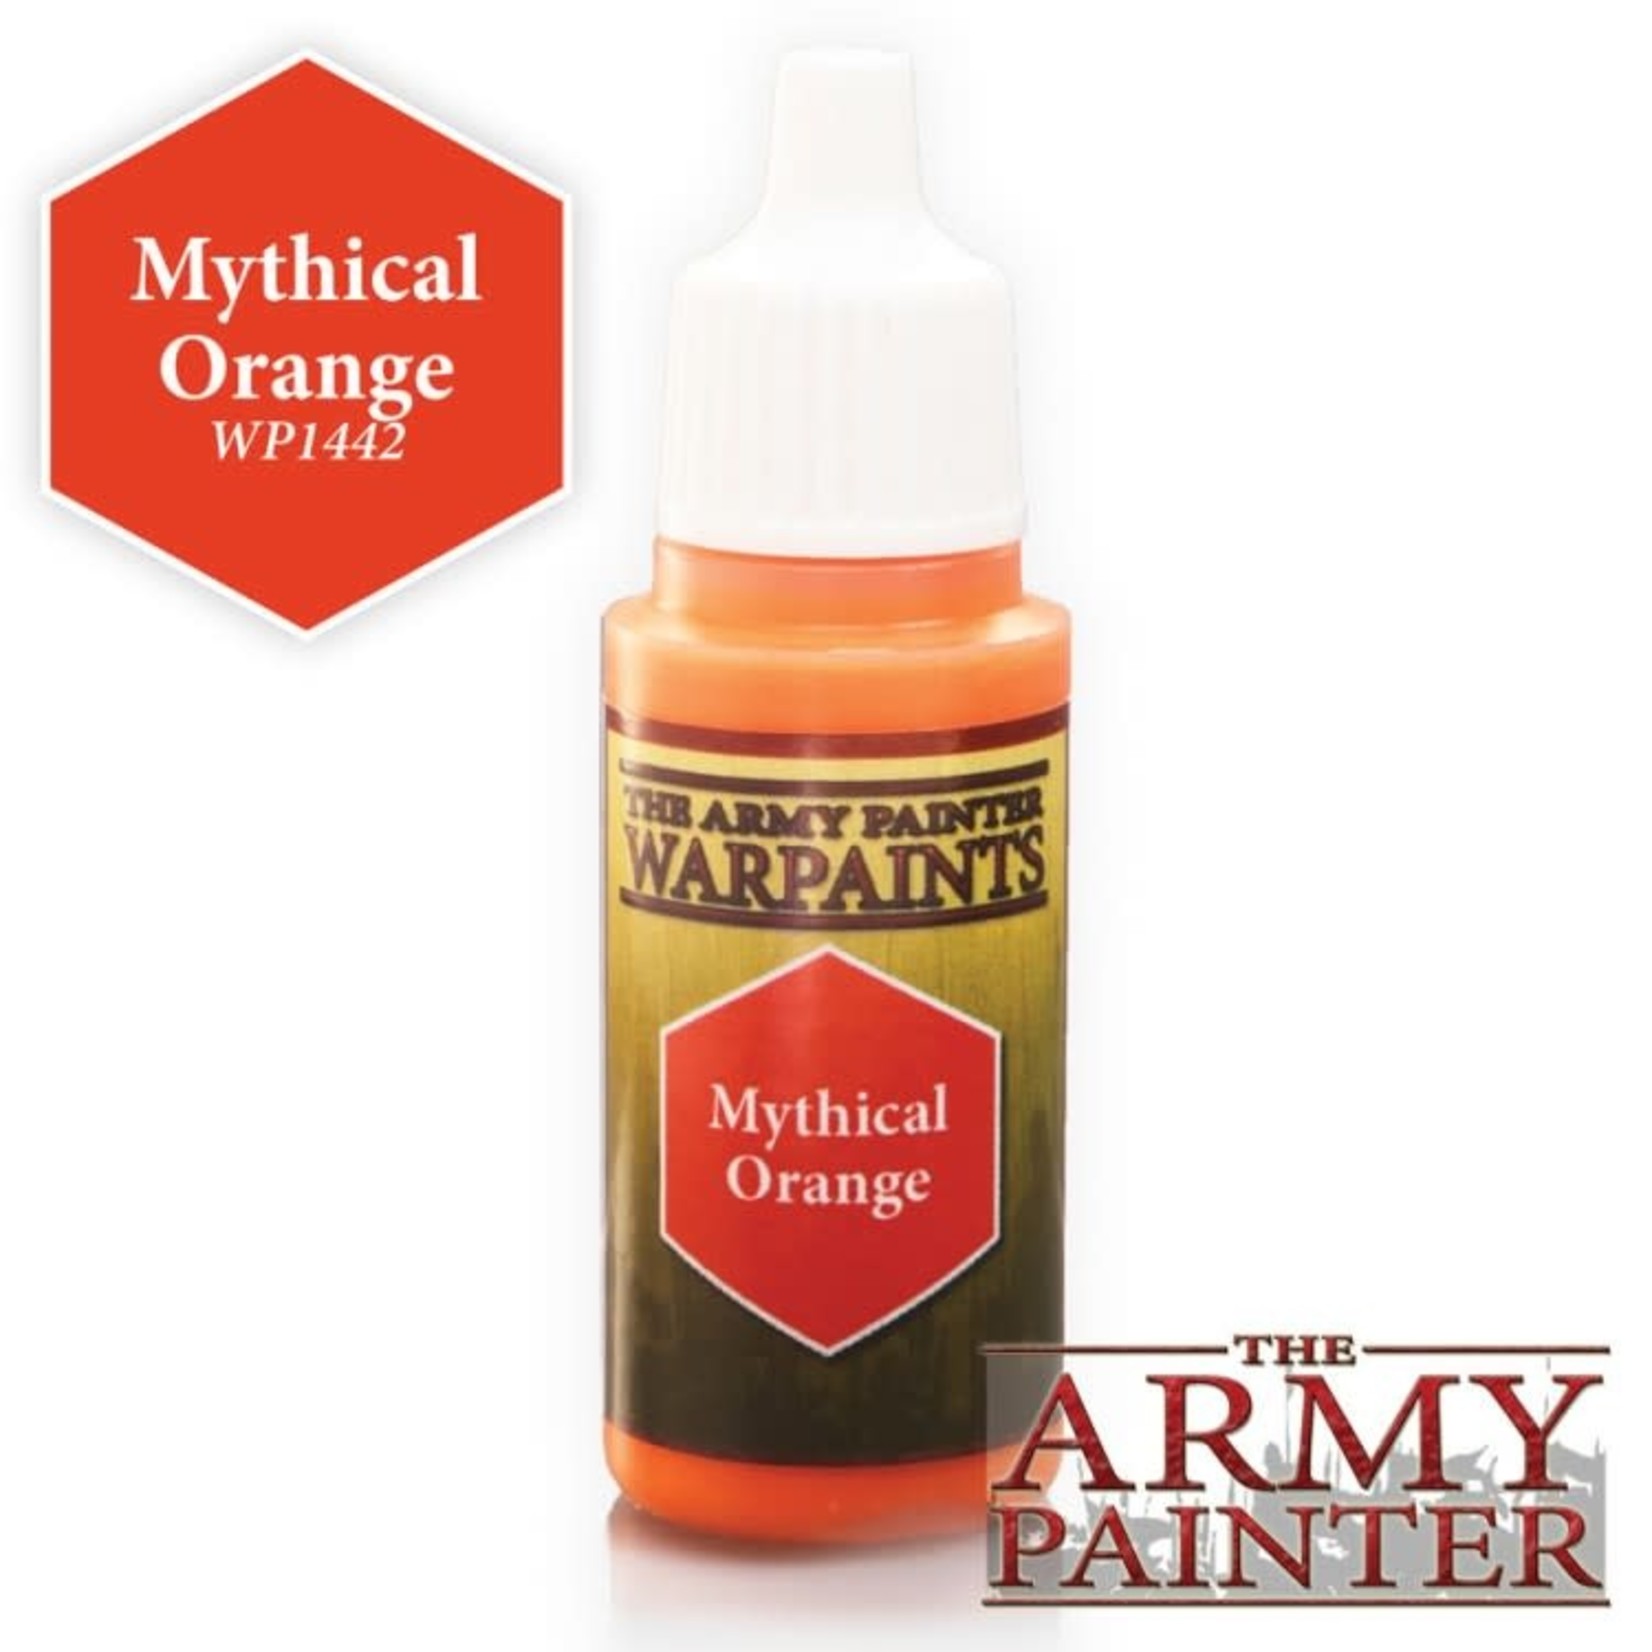 Army Painter Army Painter Warpaints Mythical Orange